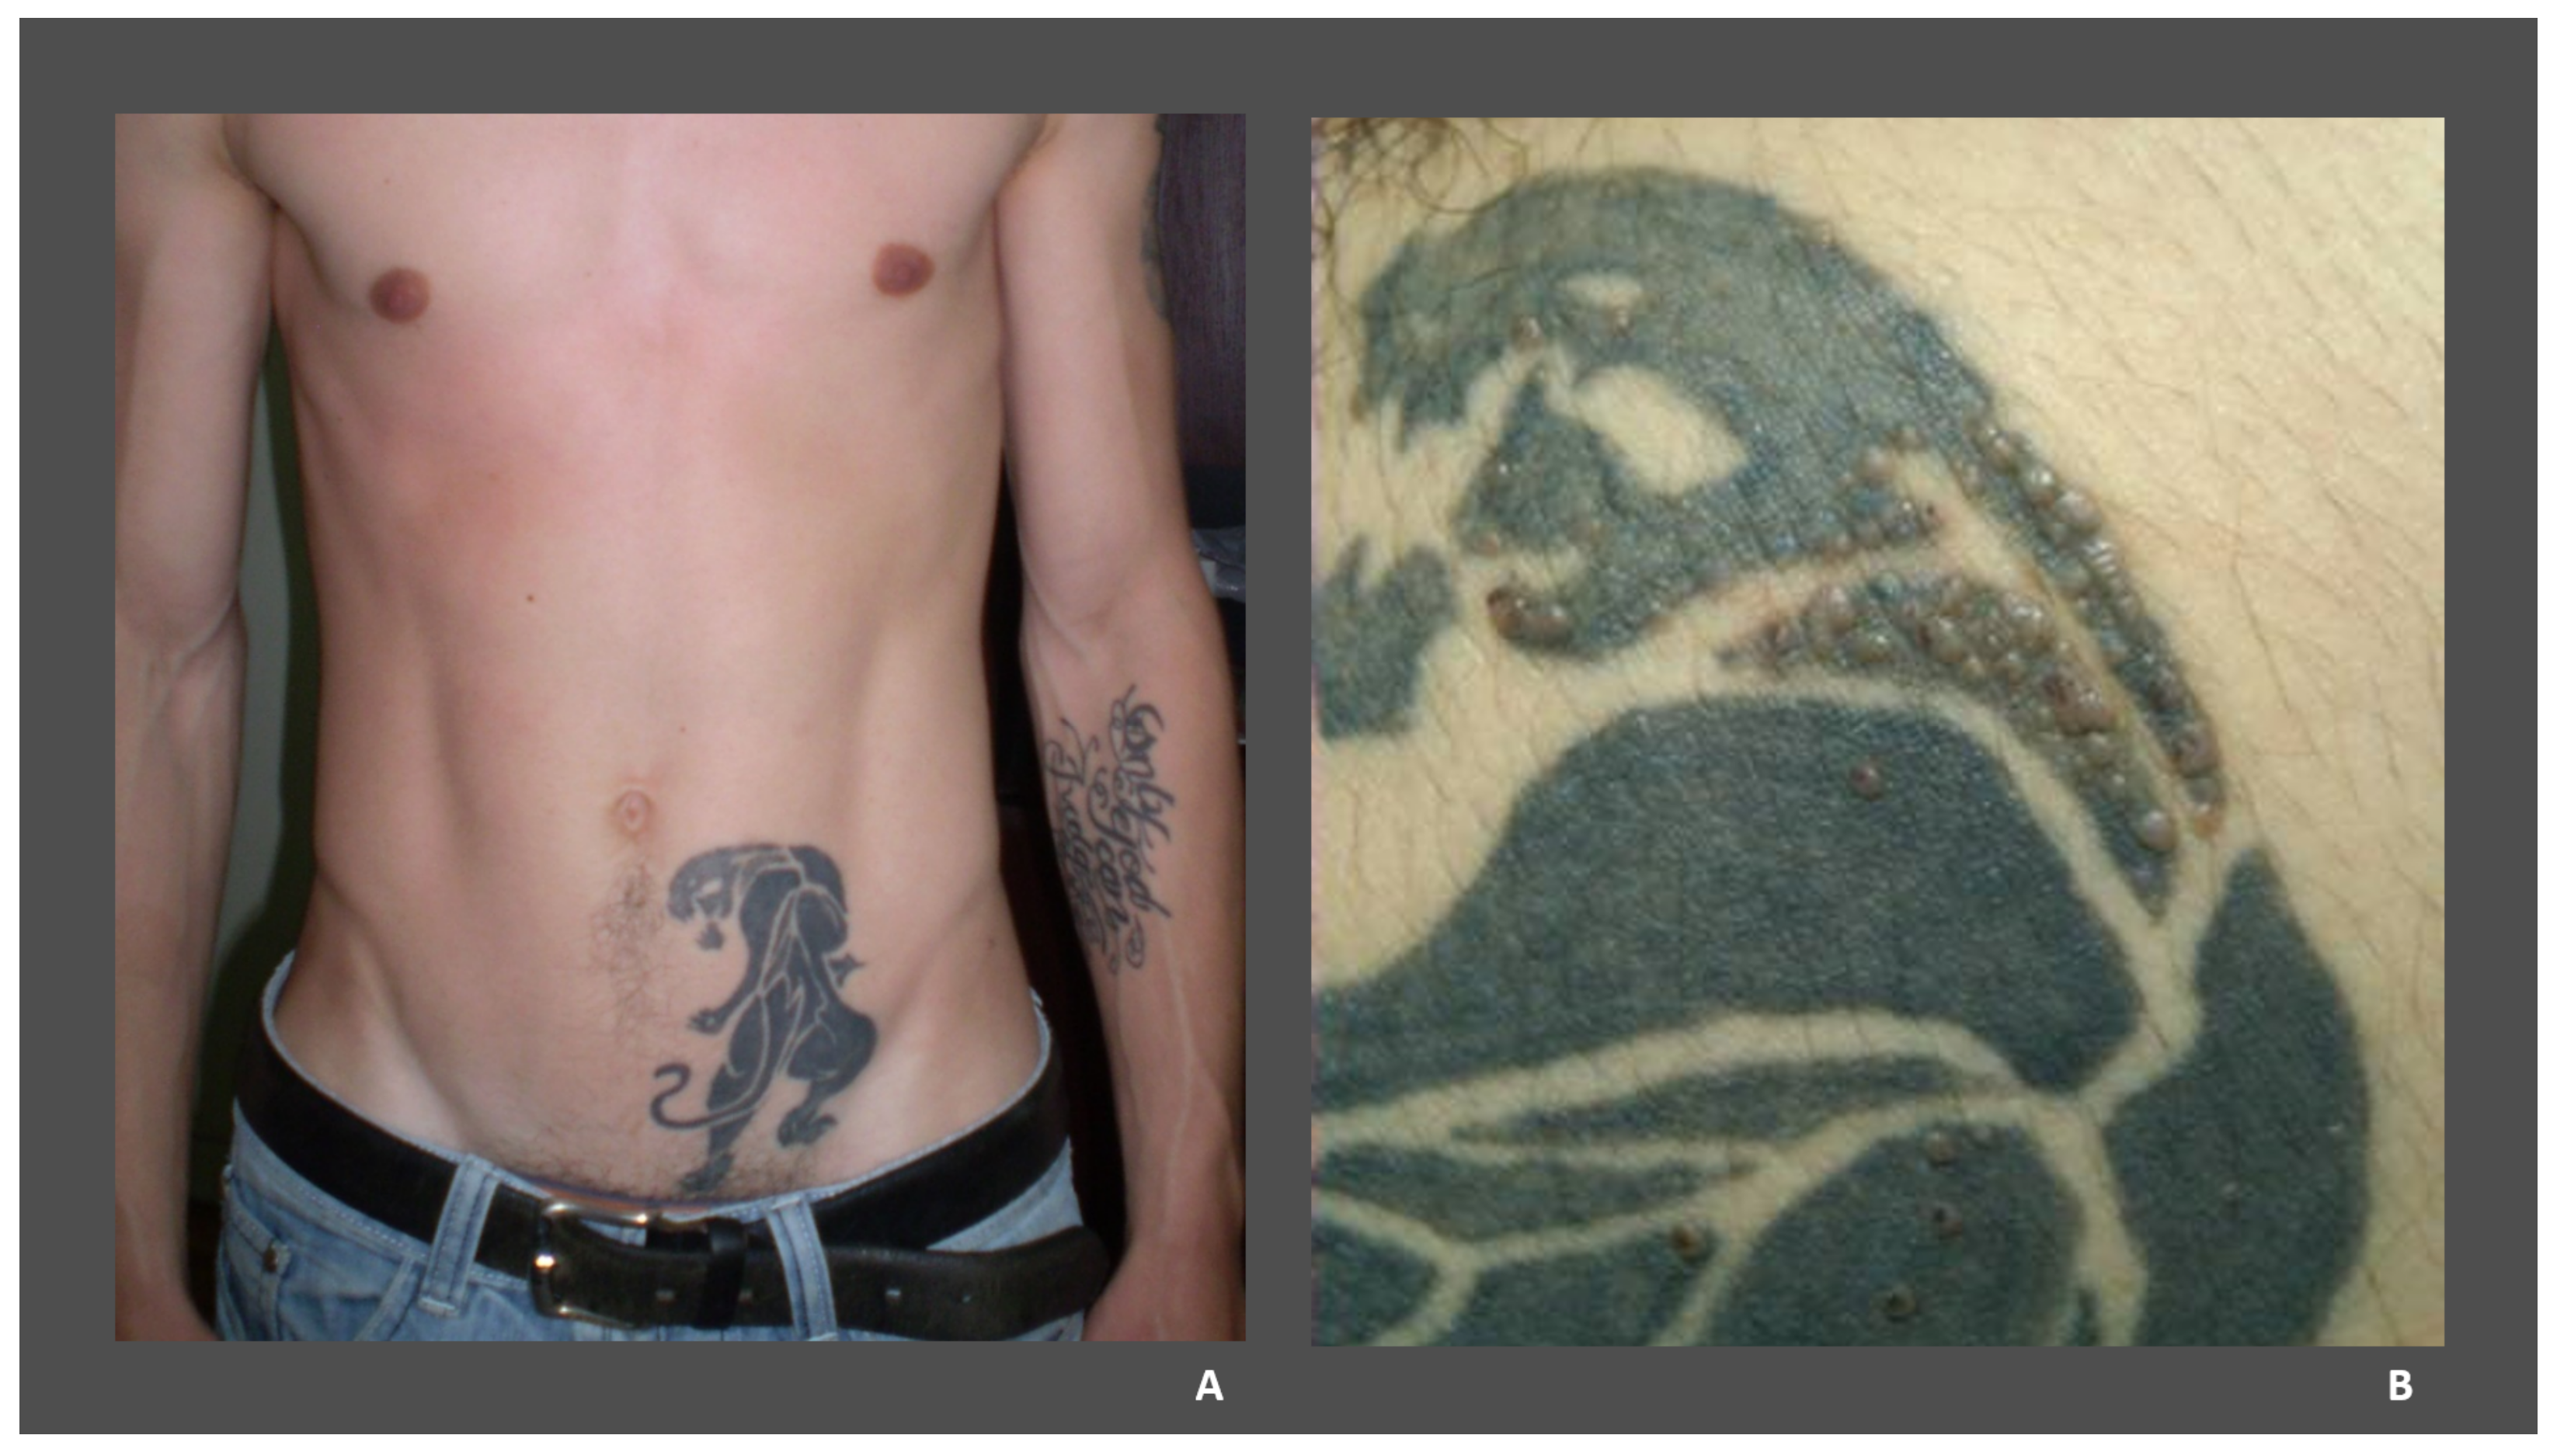 Are visible tattoos in the scientific research, academia, and PhD fields  frowned upon? - Quora